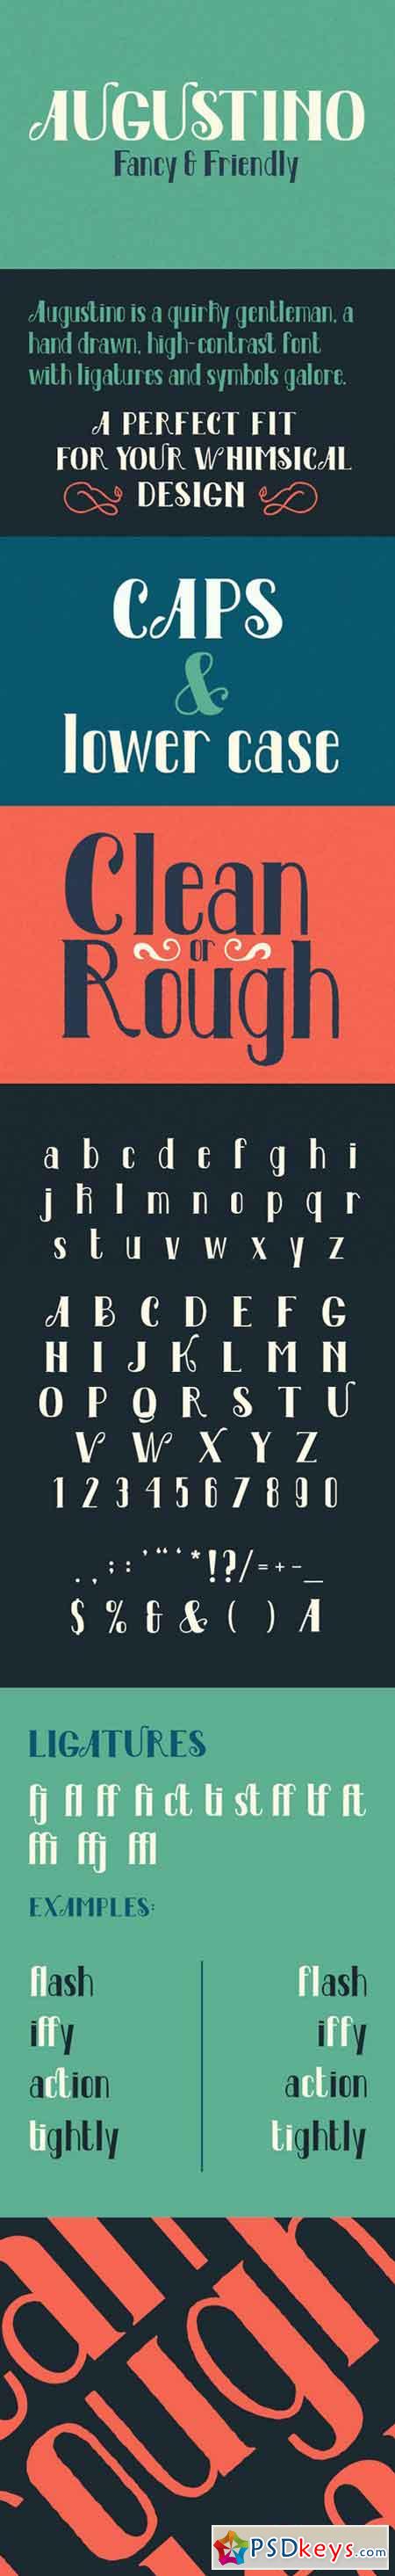 Augustino Font Family